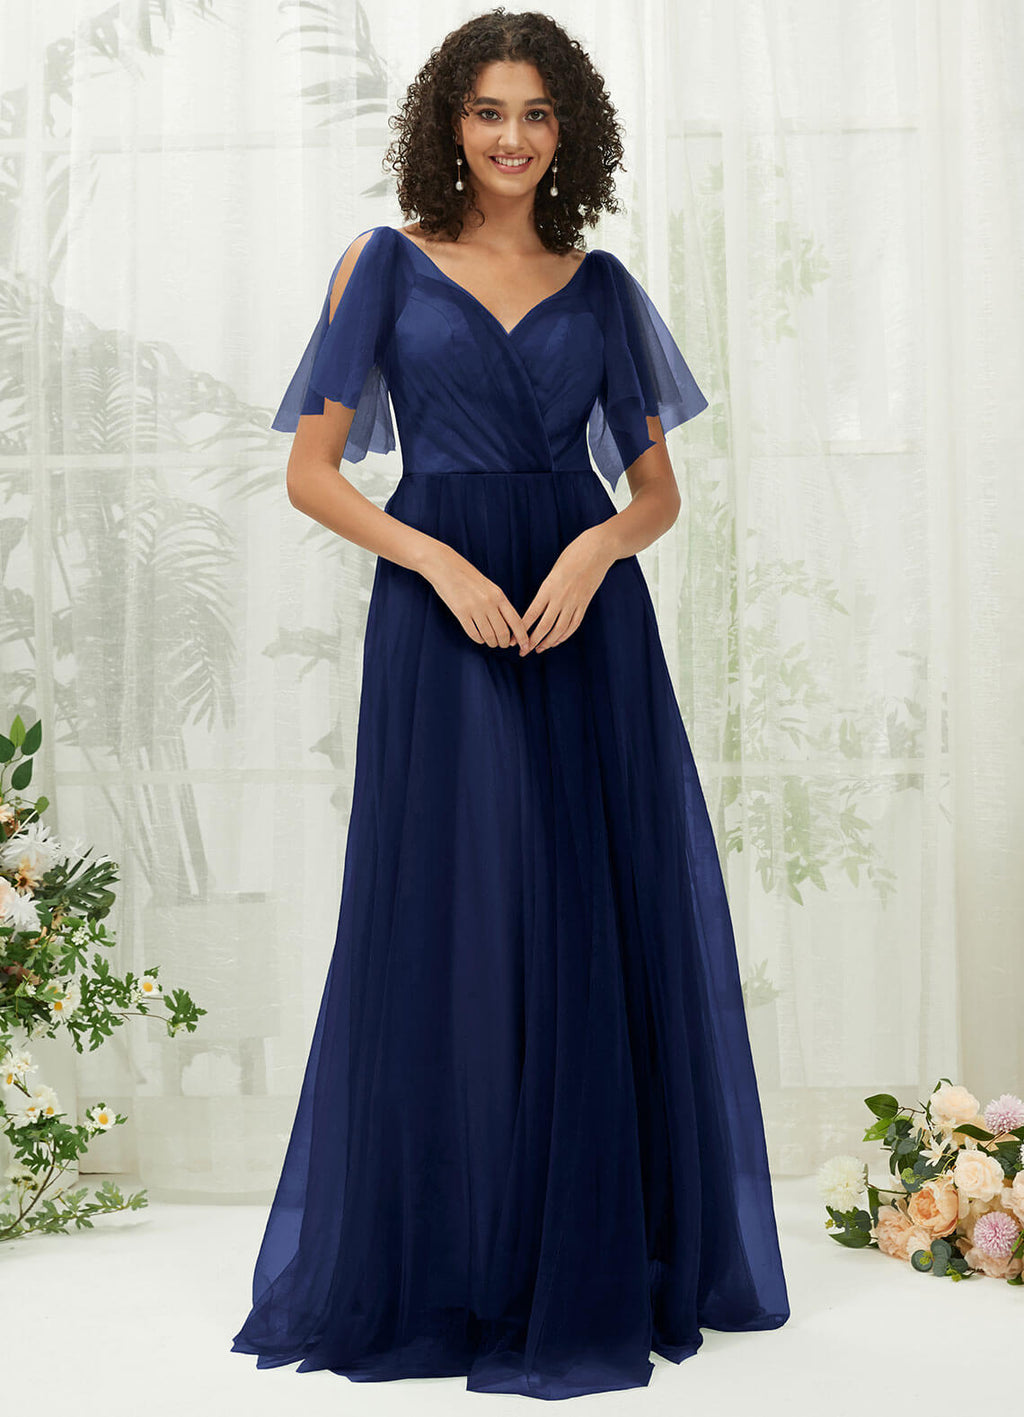 NZ Bridal Navy Blue Backless Tulle bridesmaid dresses R1027 Dallas a